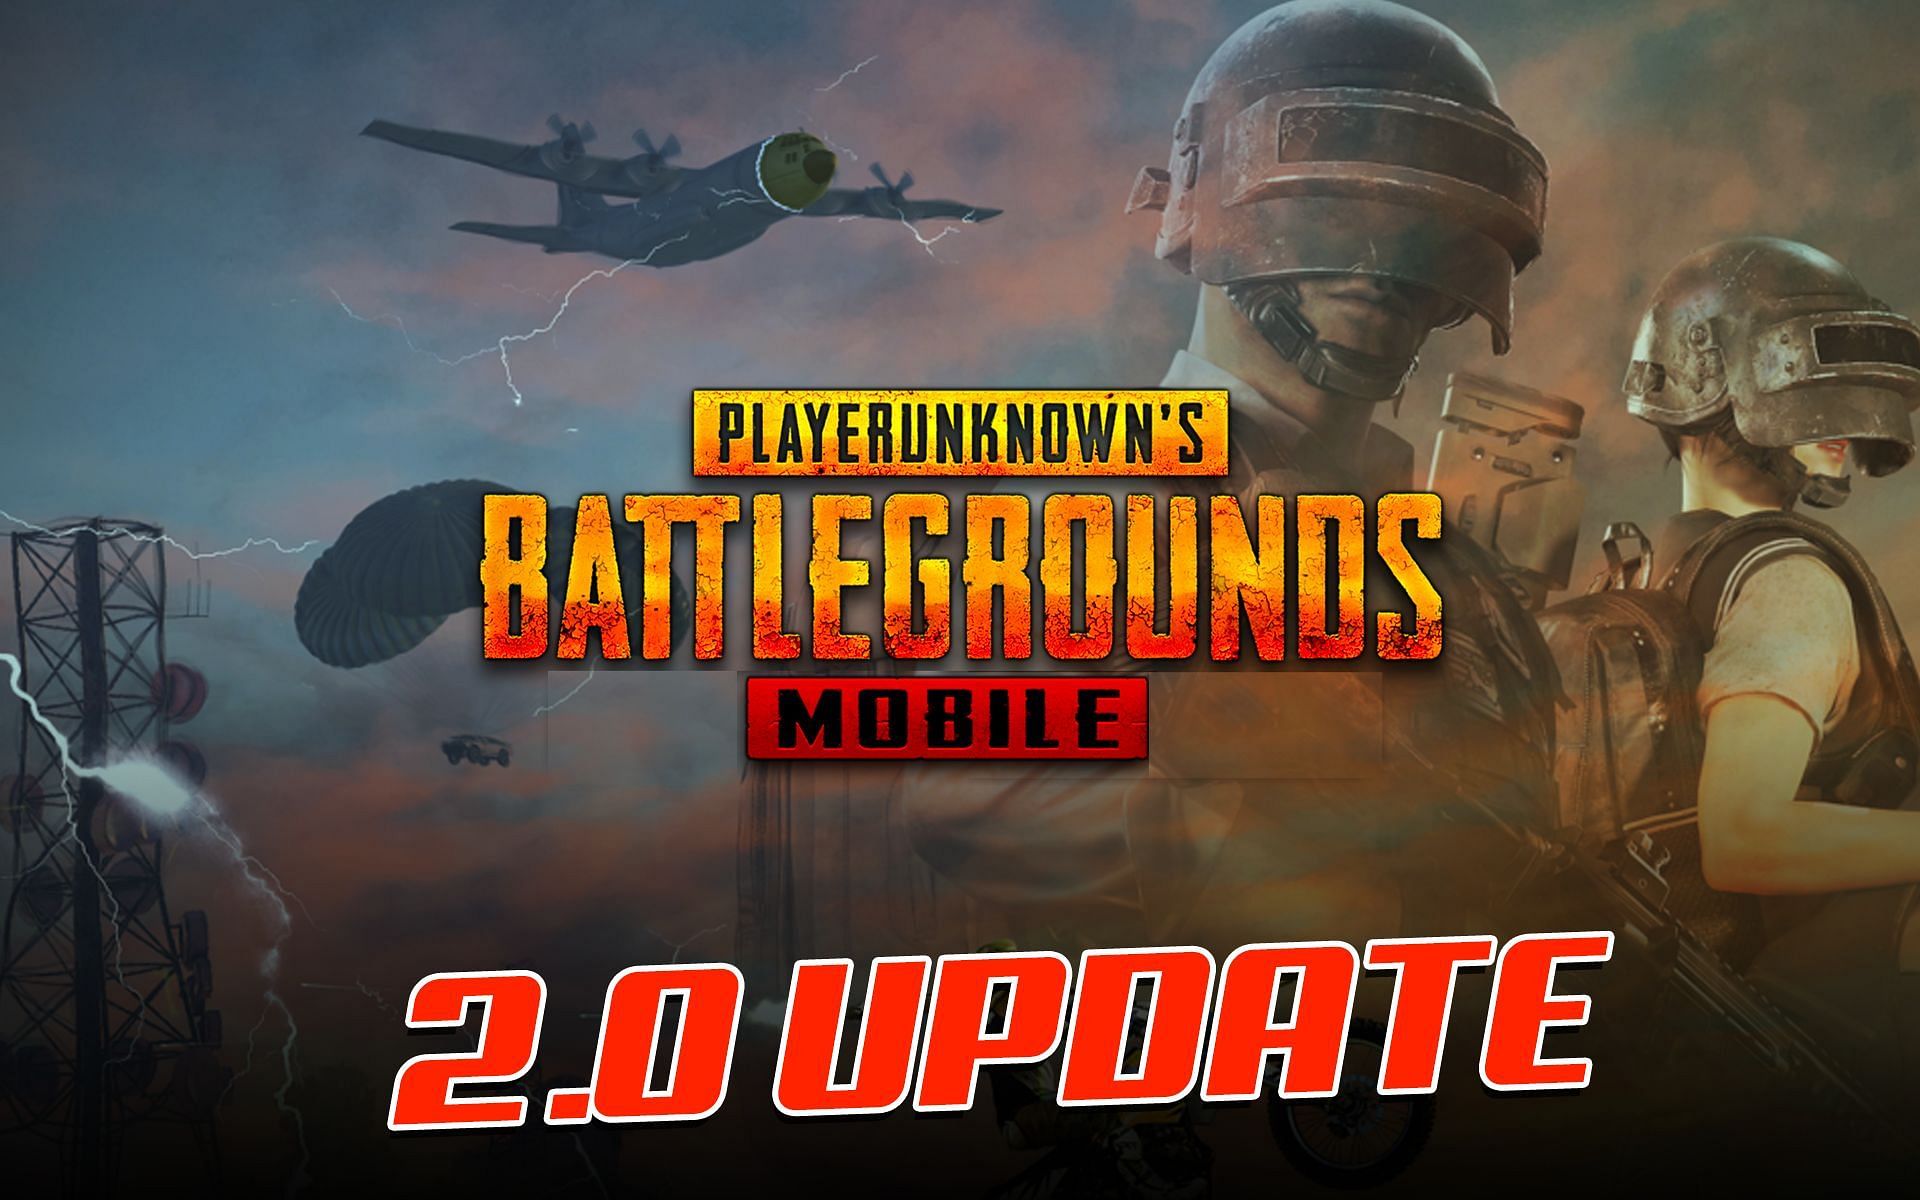 Fans look forward to the release of the PUBG Mobile 2.0 update (Image via Sportskeeda)